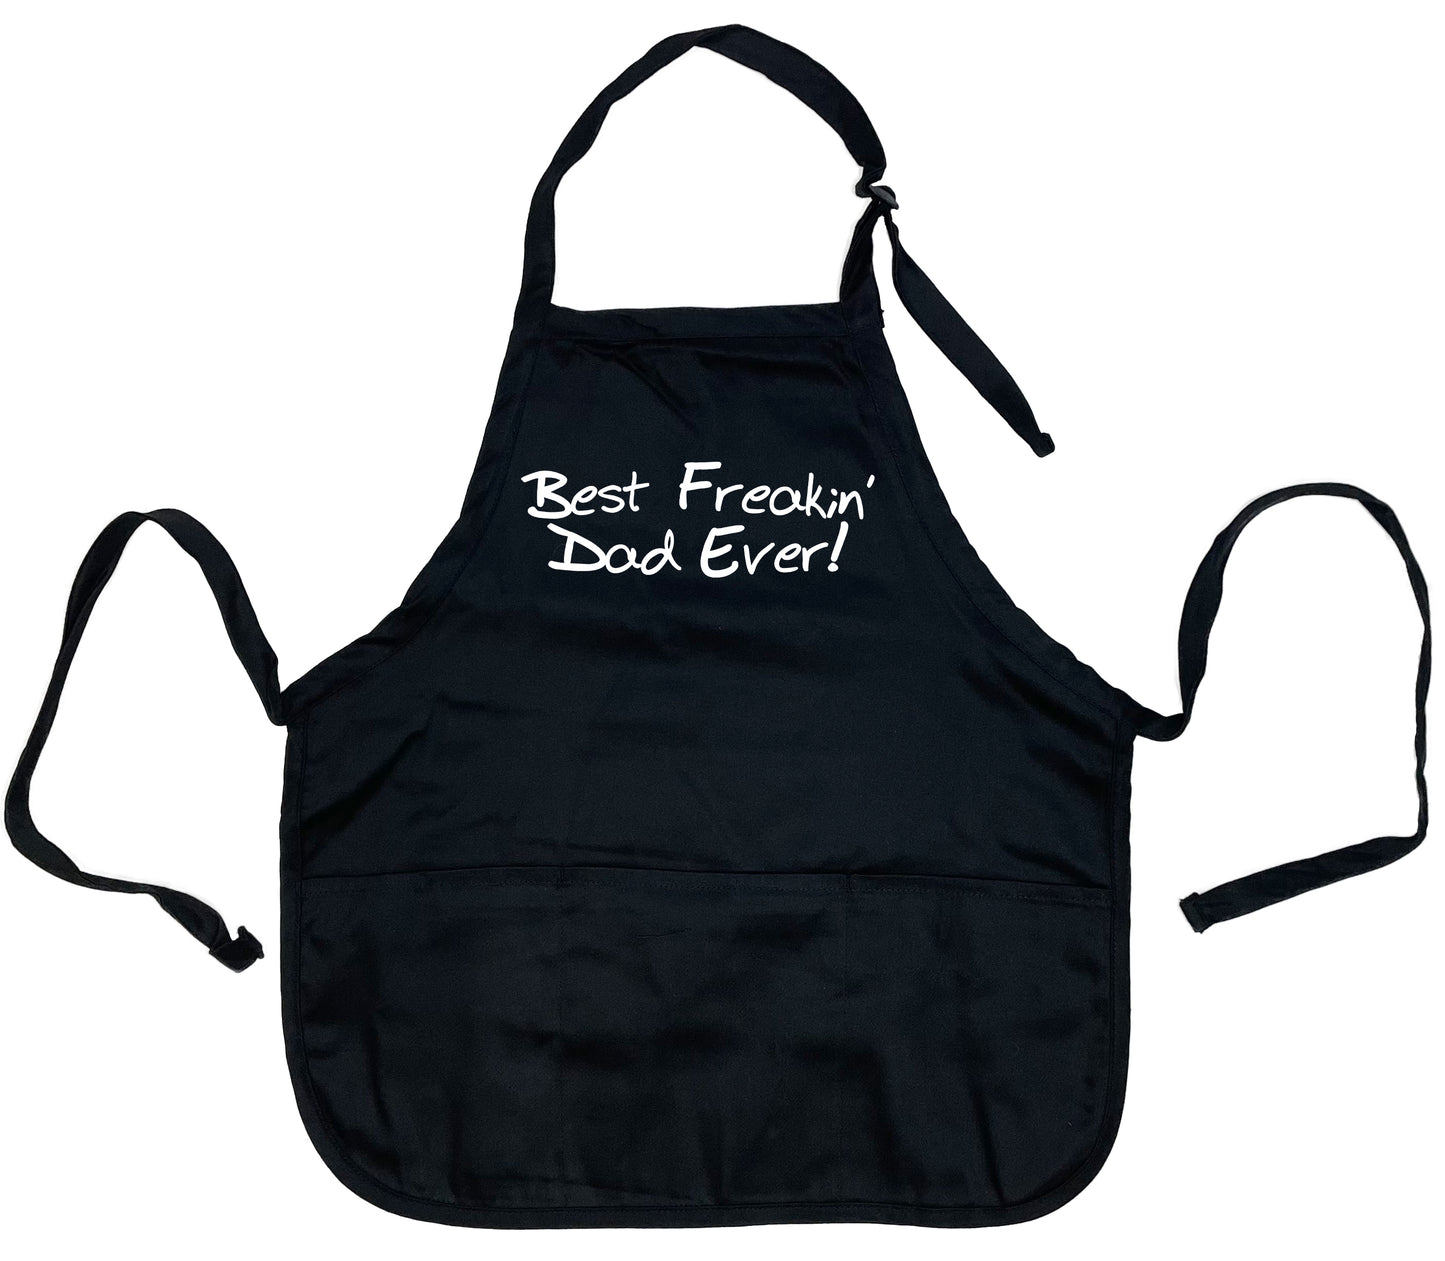 Funny T-Shirts design "Best Freakin' Dad Ever! Apron"